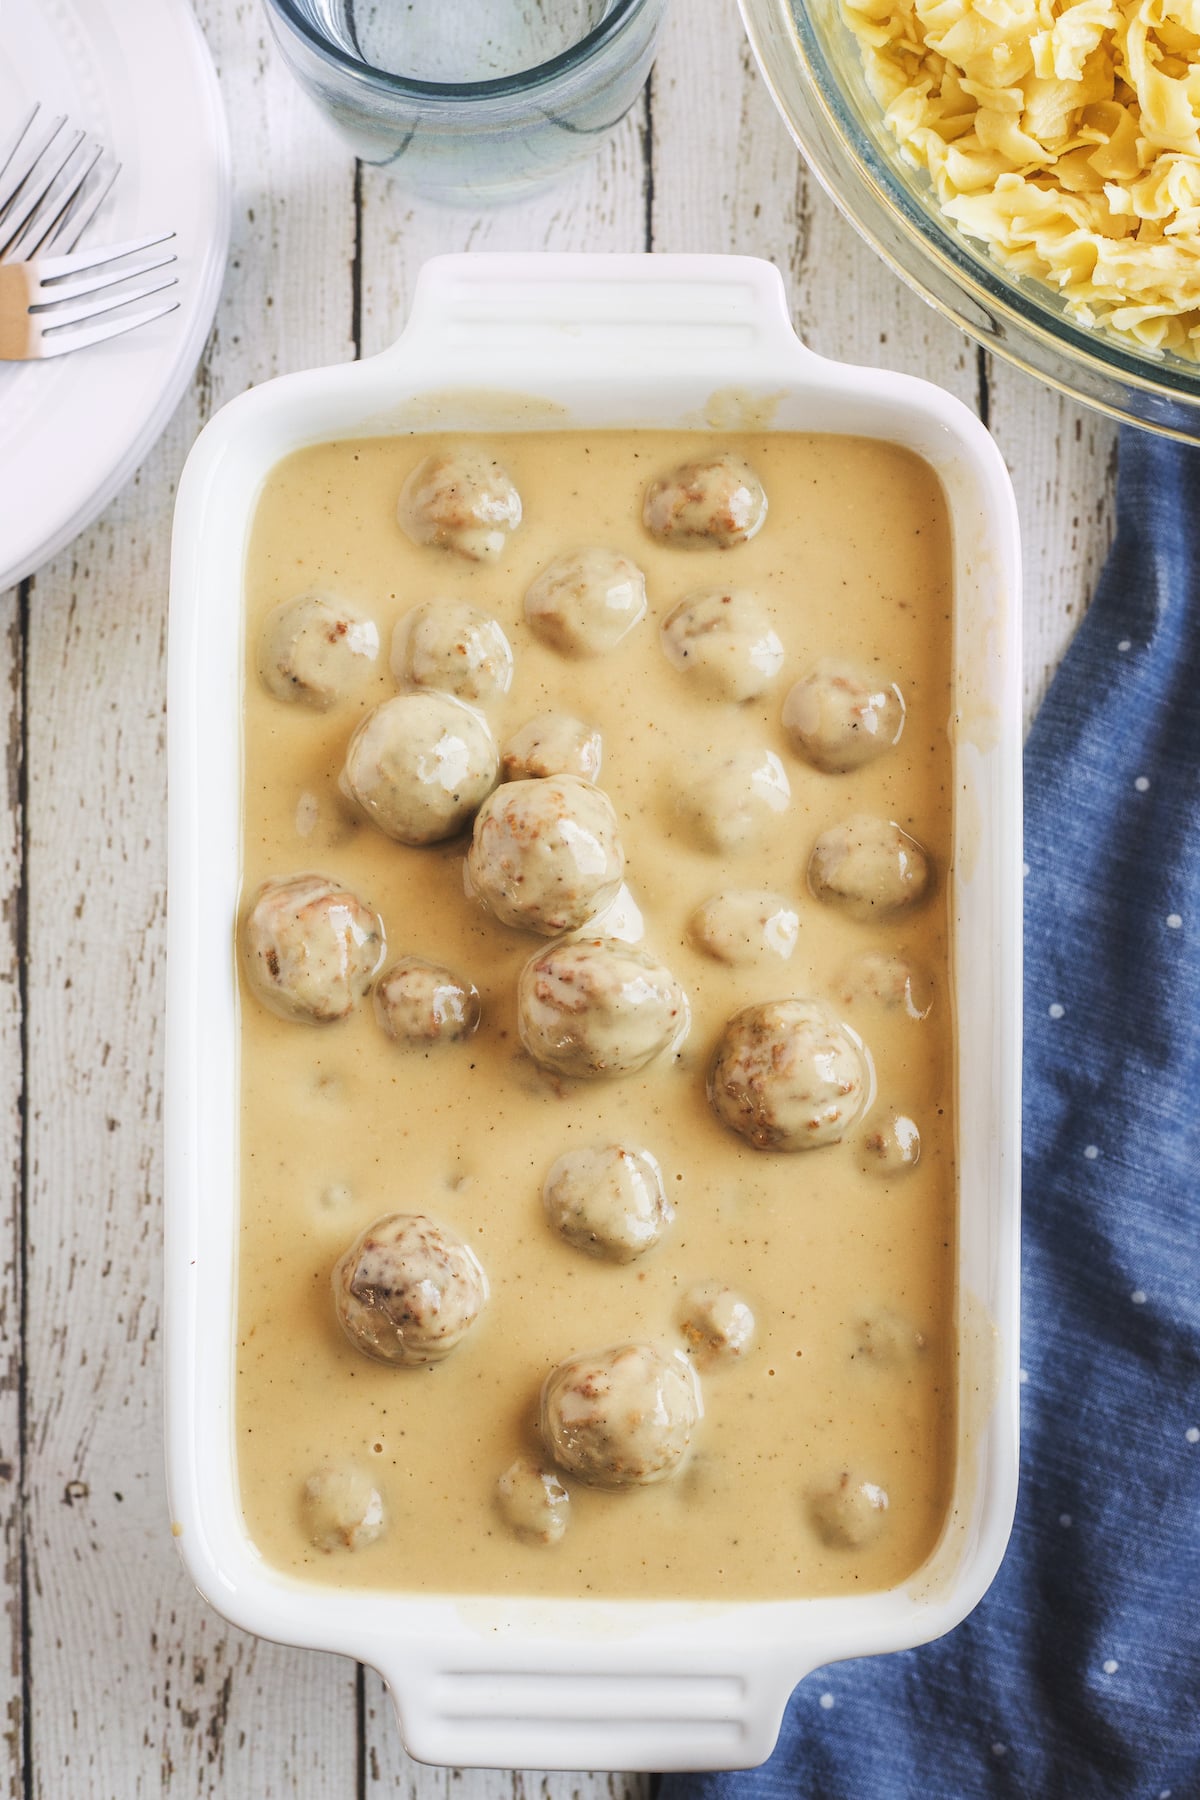 meatballs in casserole dish with sauce.